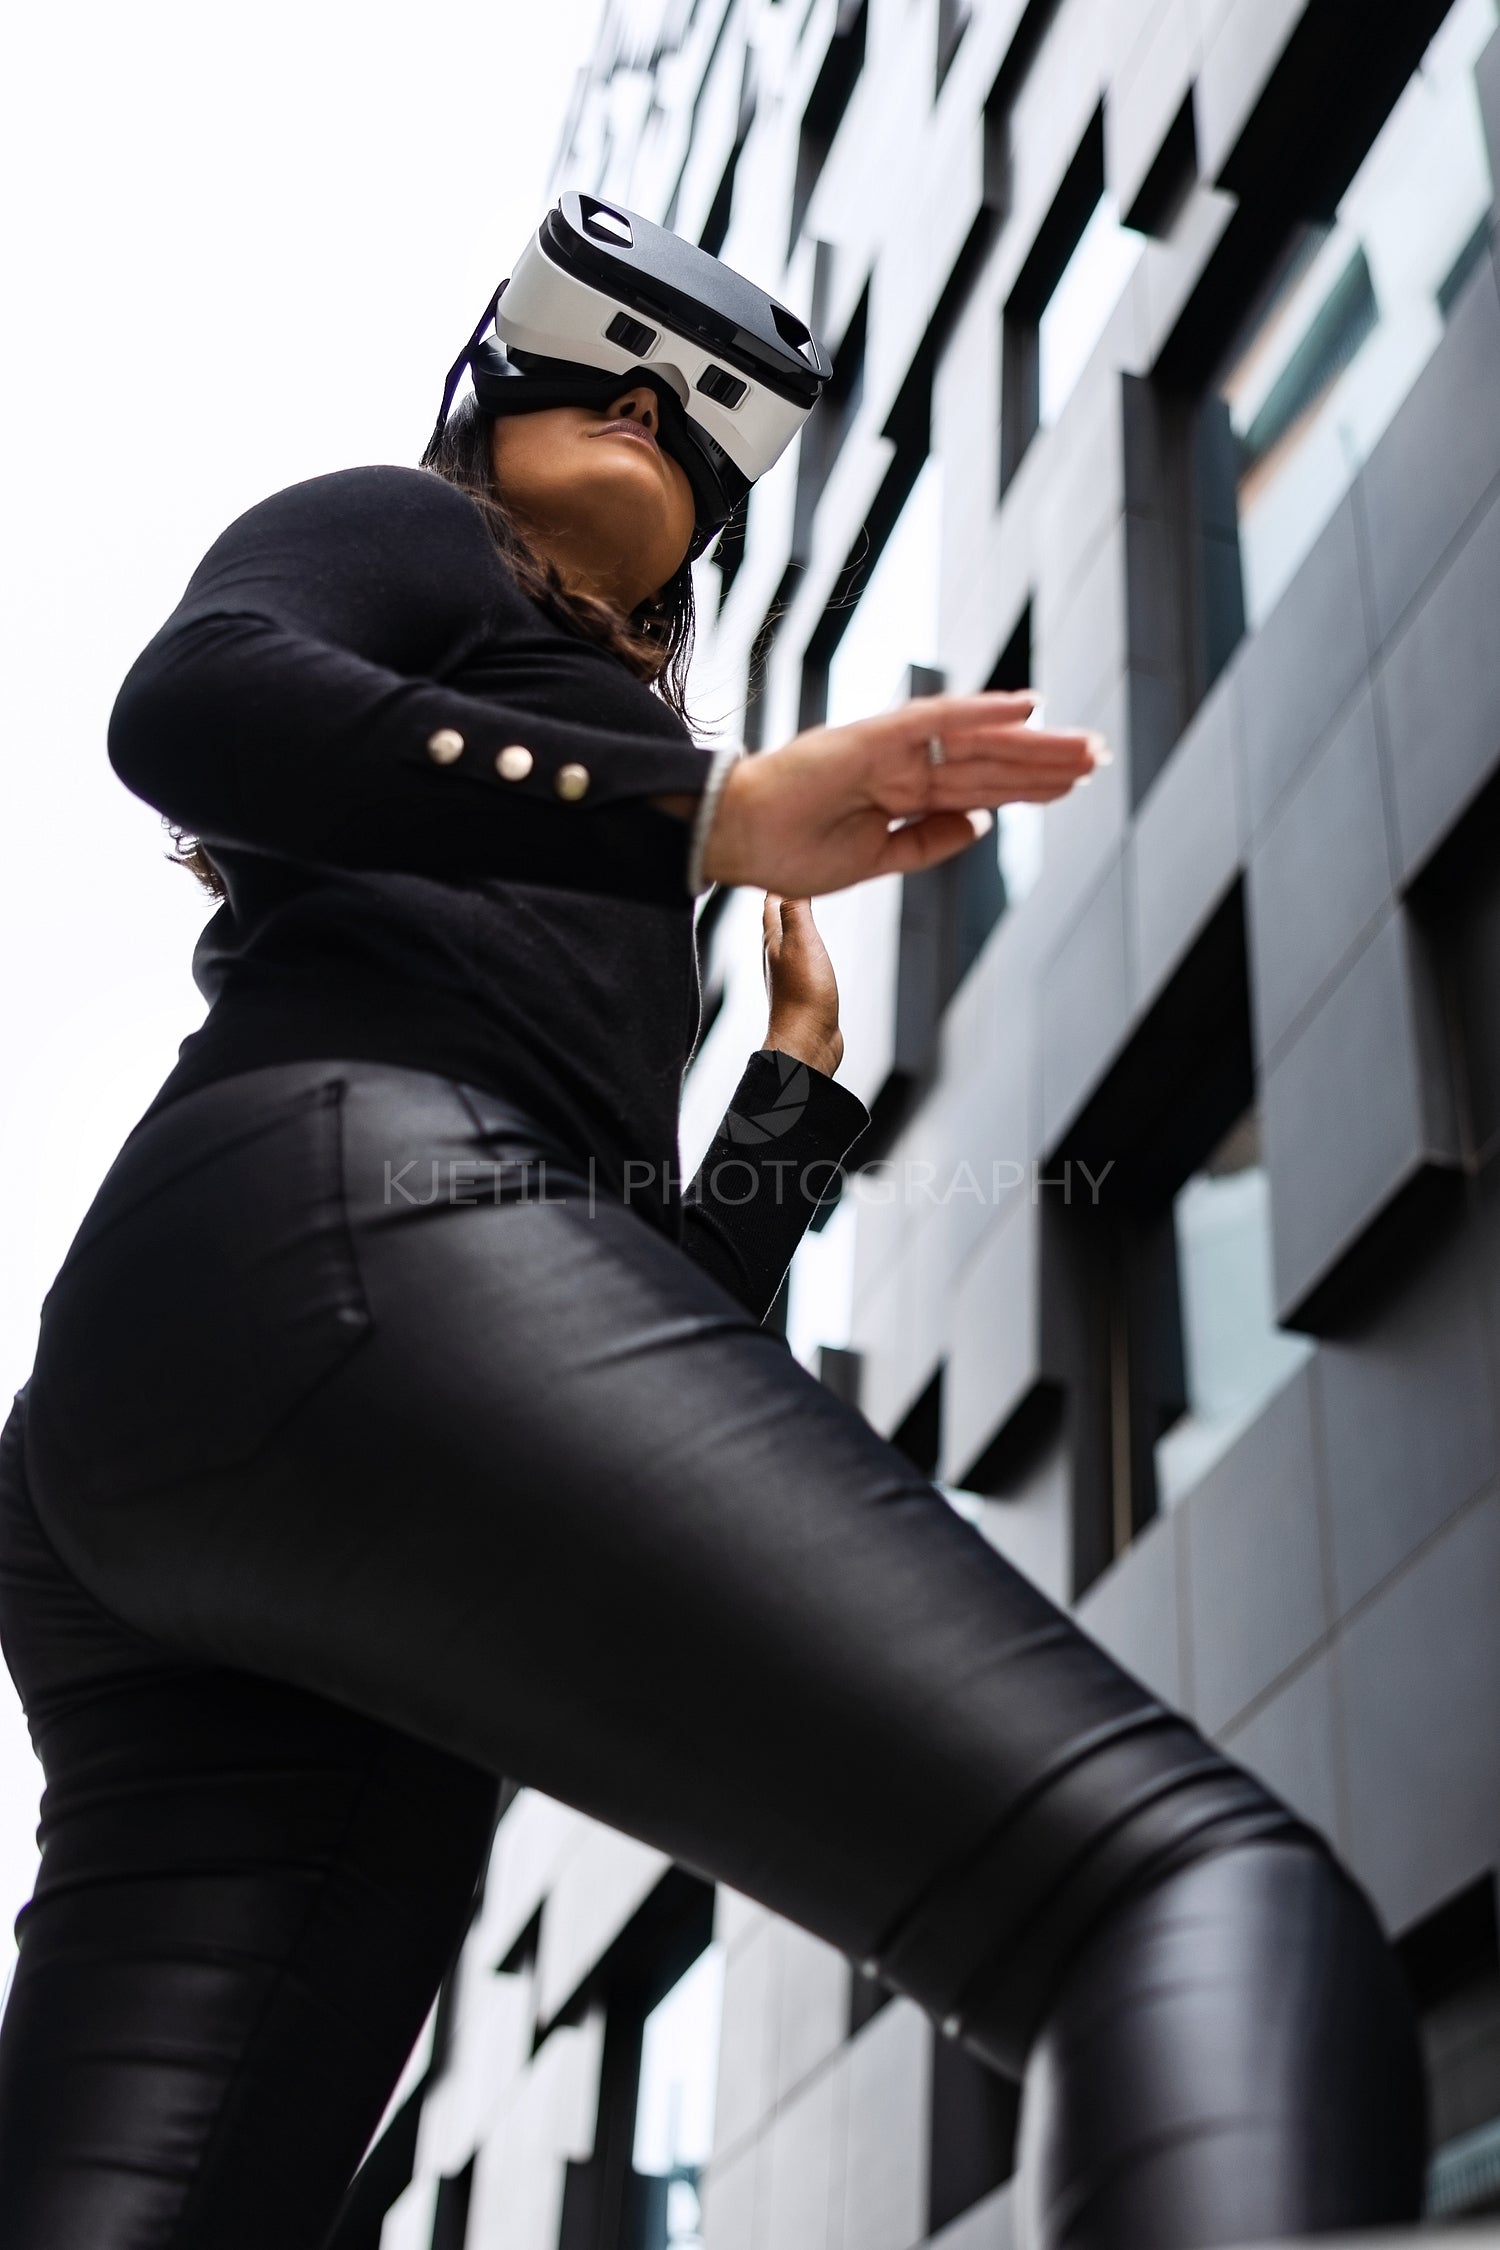 Focused Woman With VR Glasses In Futuristic and Urban City